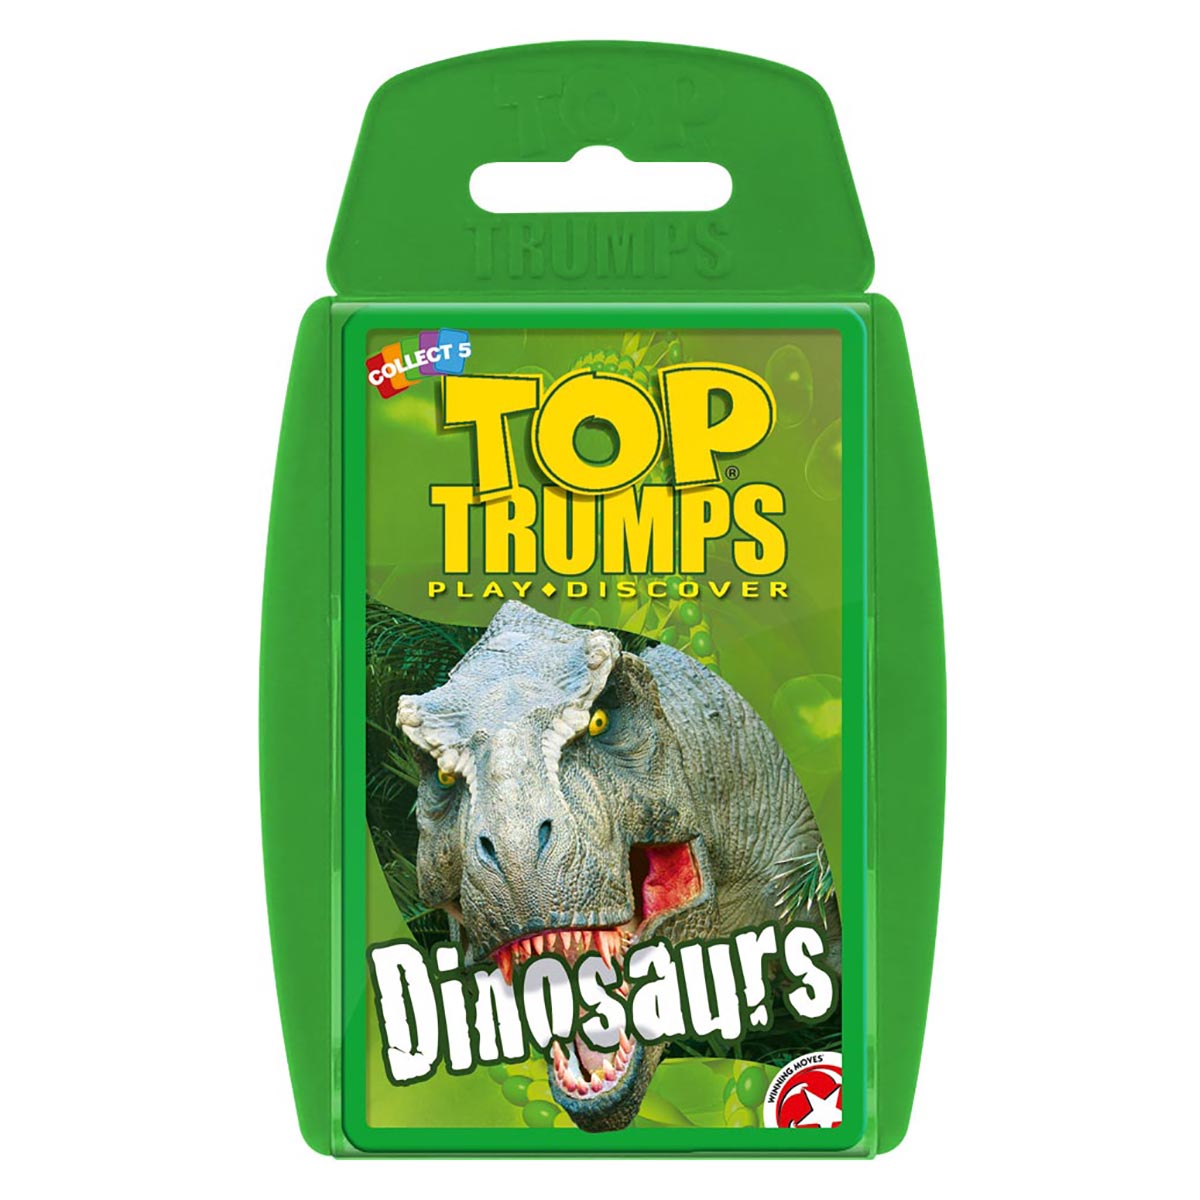 View the best prices for: dinosaurs top trumps classics card game